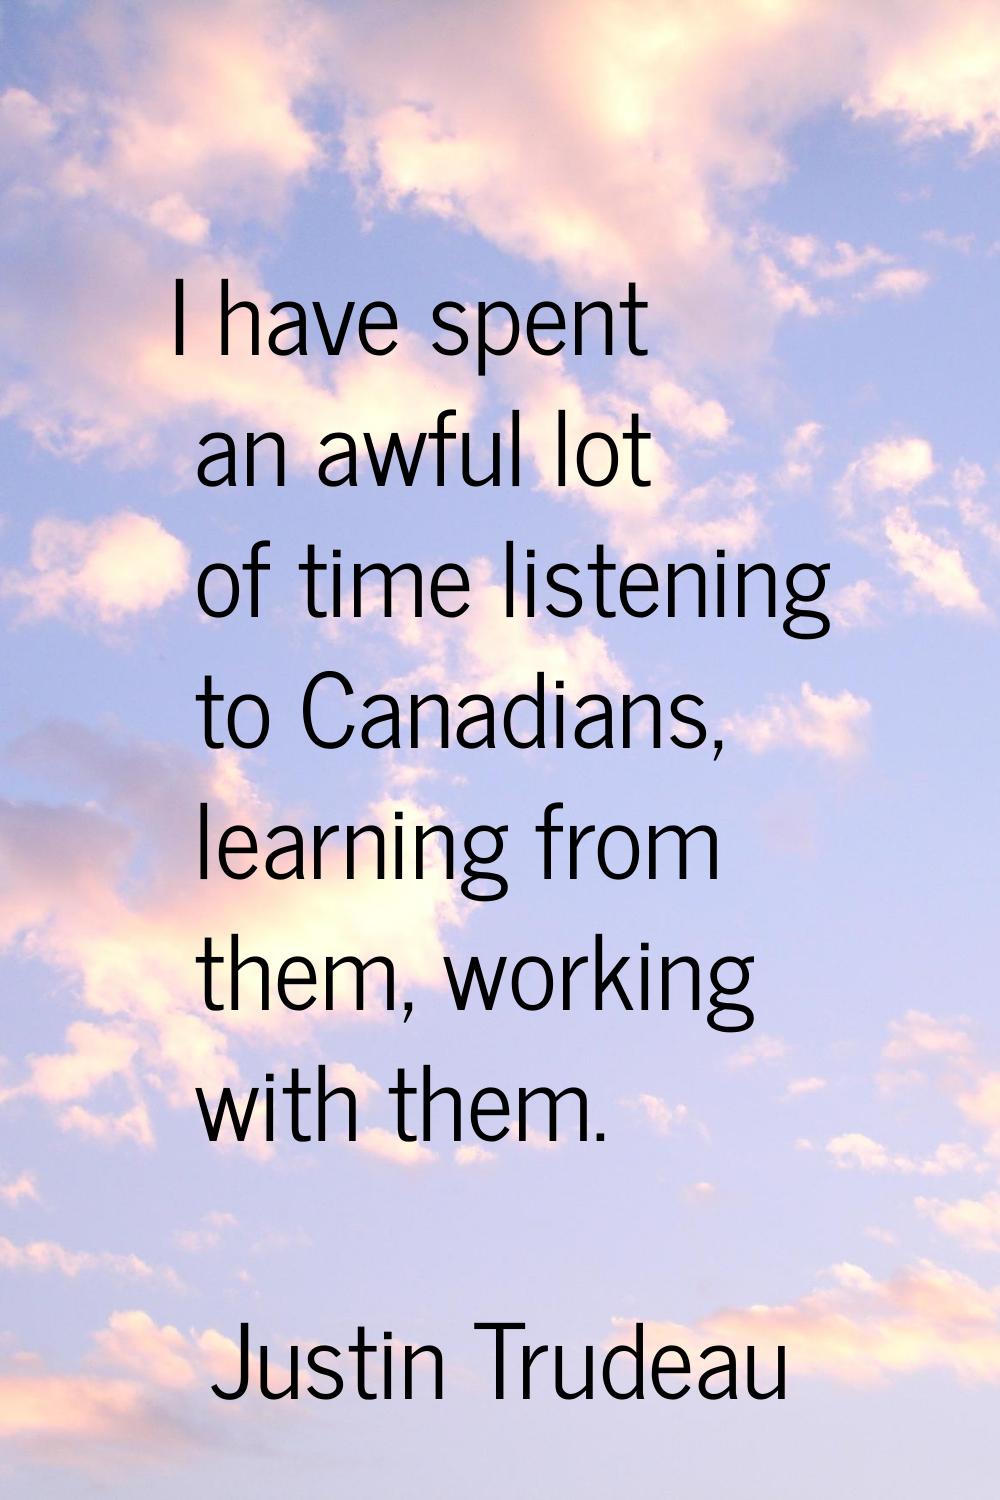 I have spent an awful lot of time listening to Canadians, learning from them, working with them.